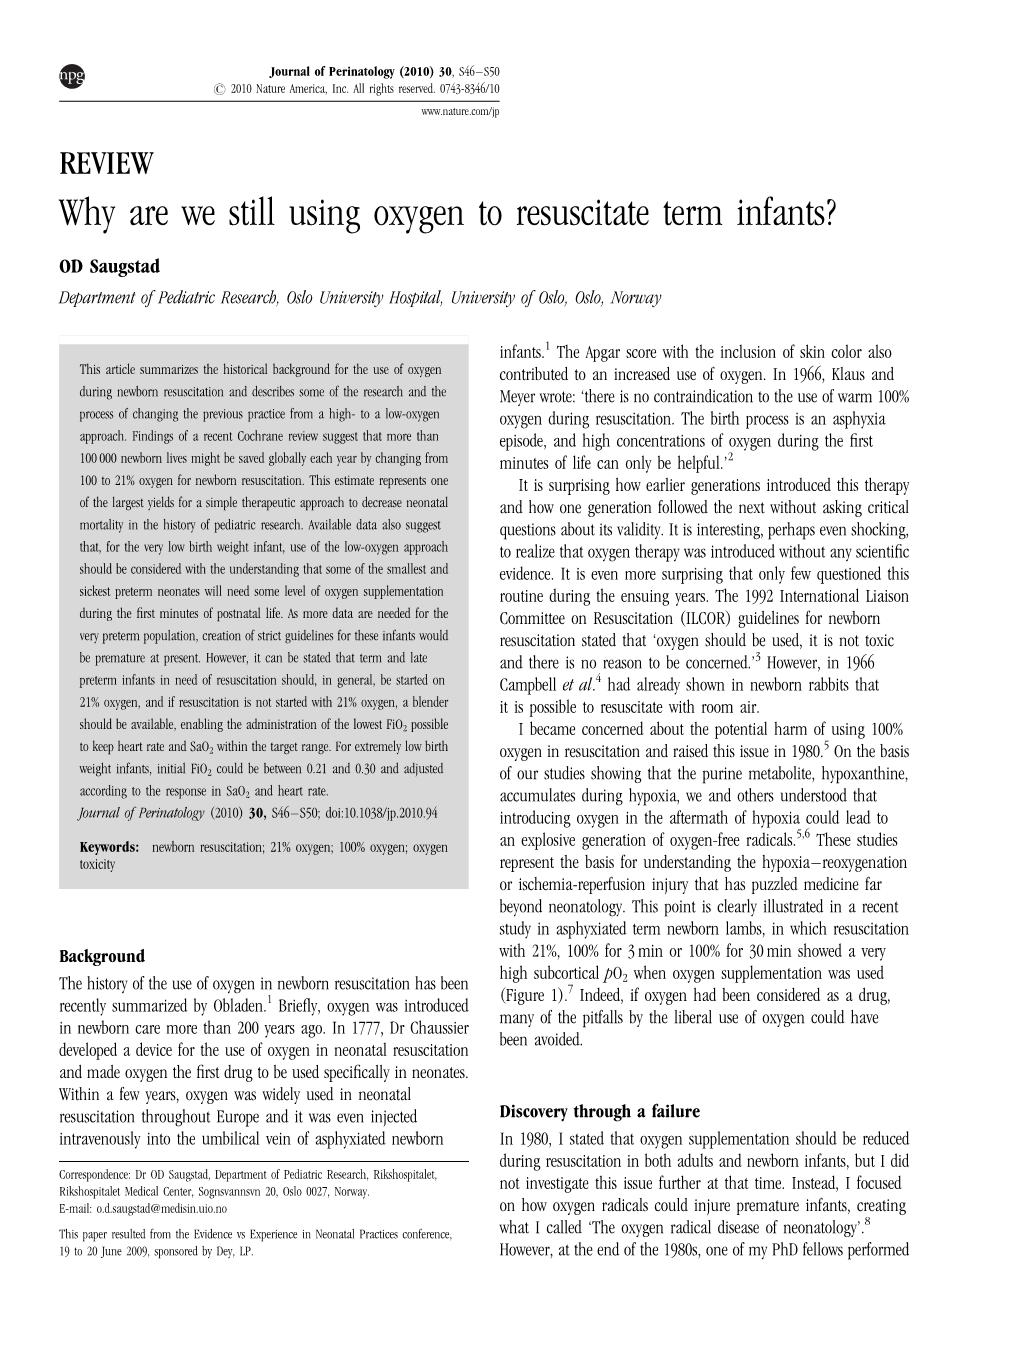 Why Are We Still Using Oxygen to Resuscitate Term Infants?